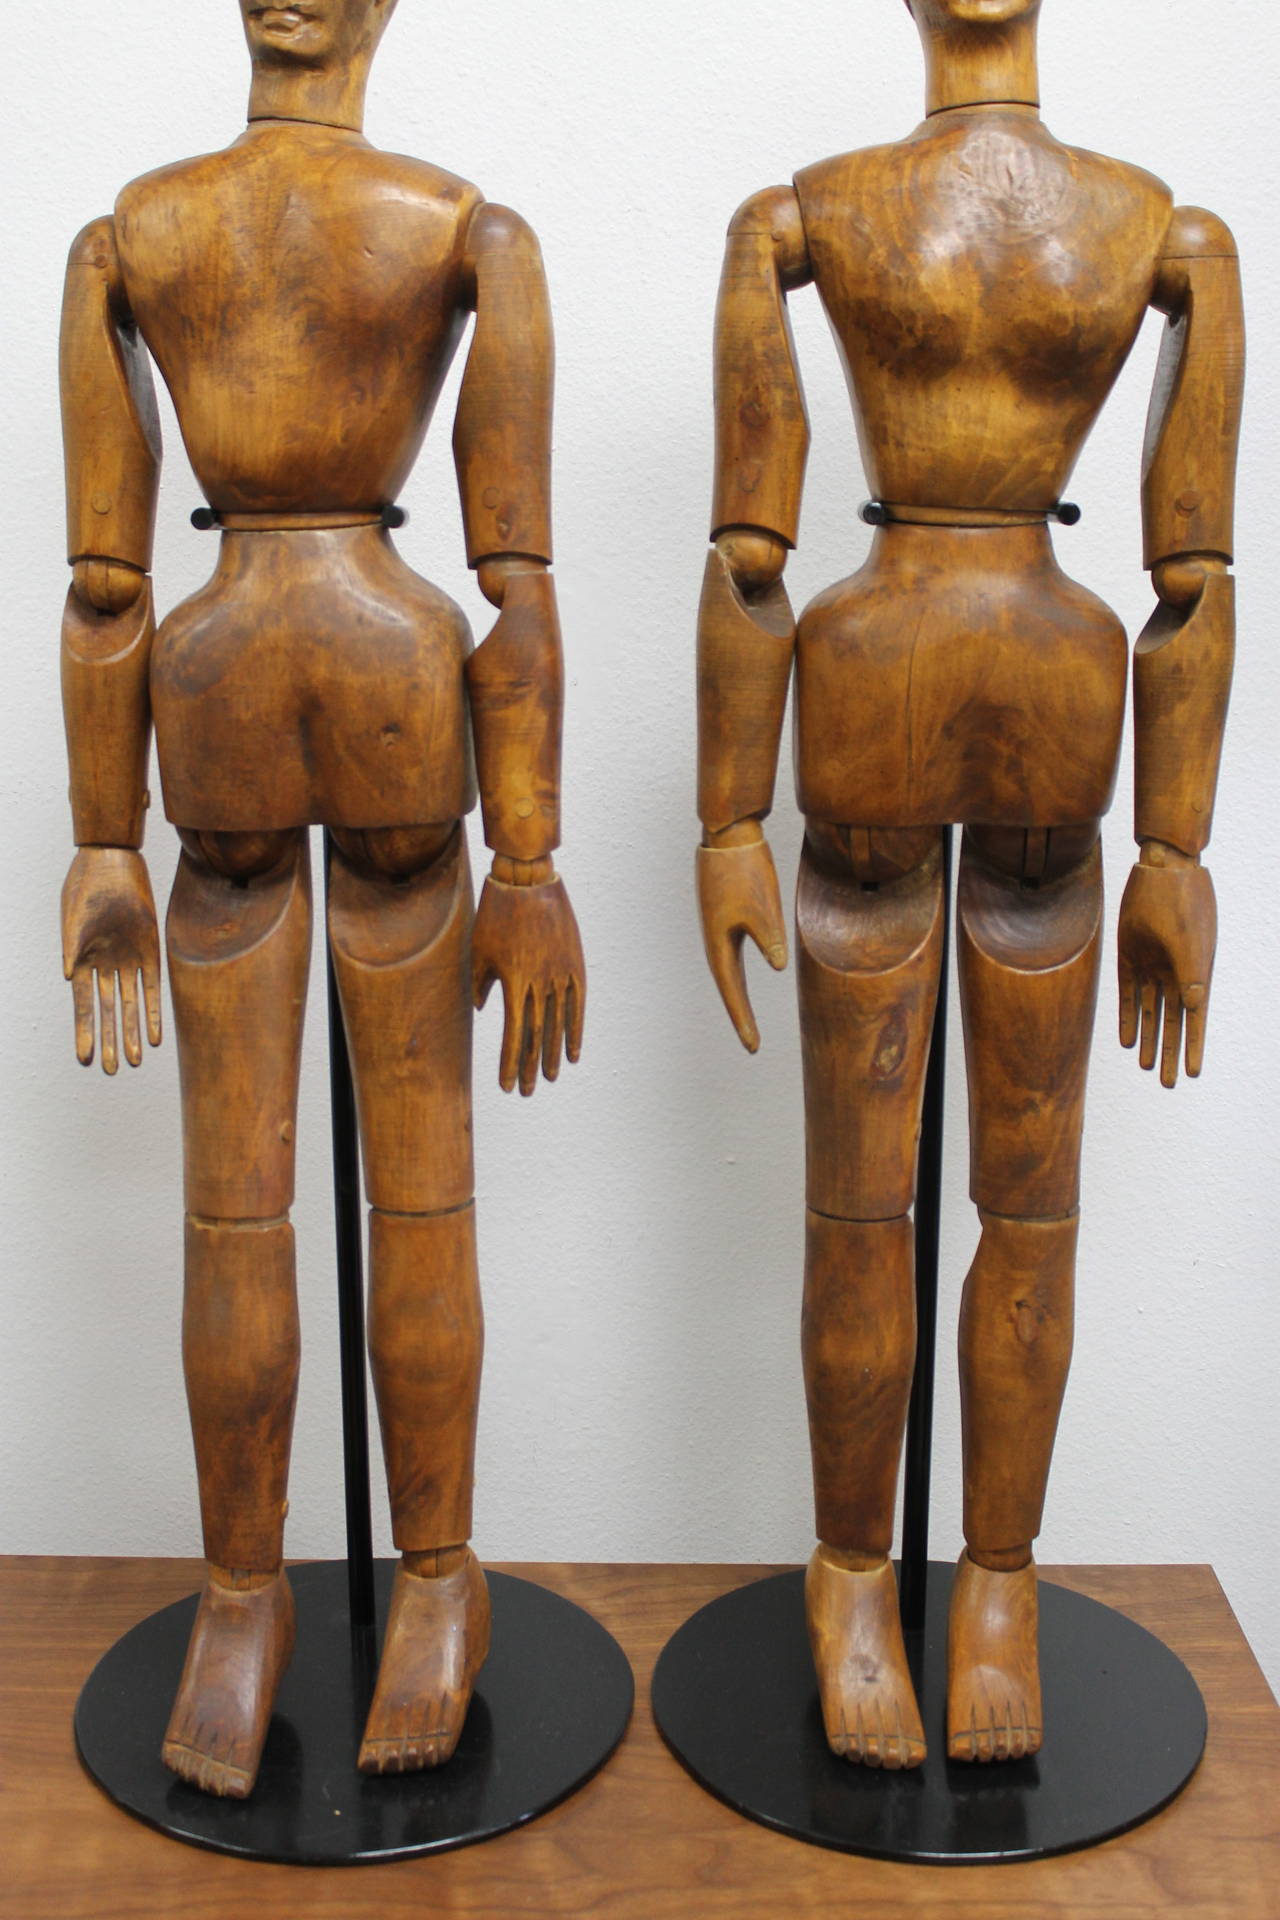 A pair of hand carved mannequinss or models from the turn of the 20th century.  It’s rare to find a male/female pair of articulated wood mannequins in such great condition.  Seems like they’ve been together since they were carved.  These come with